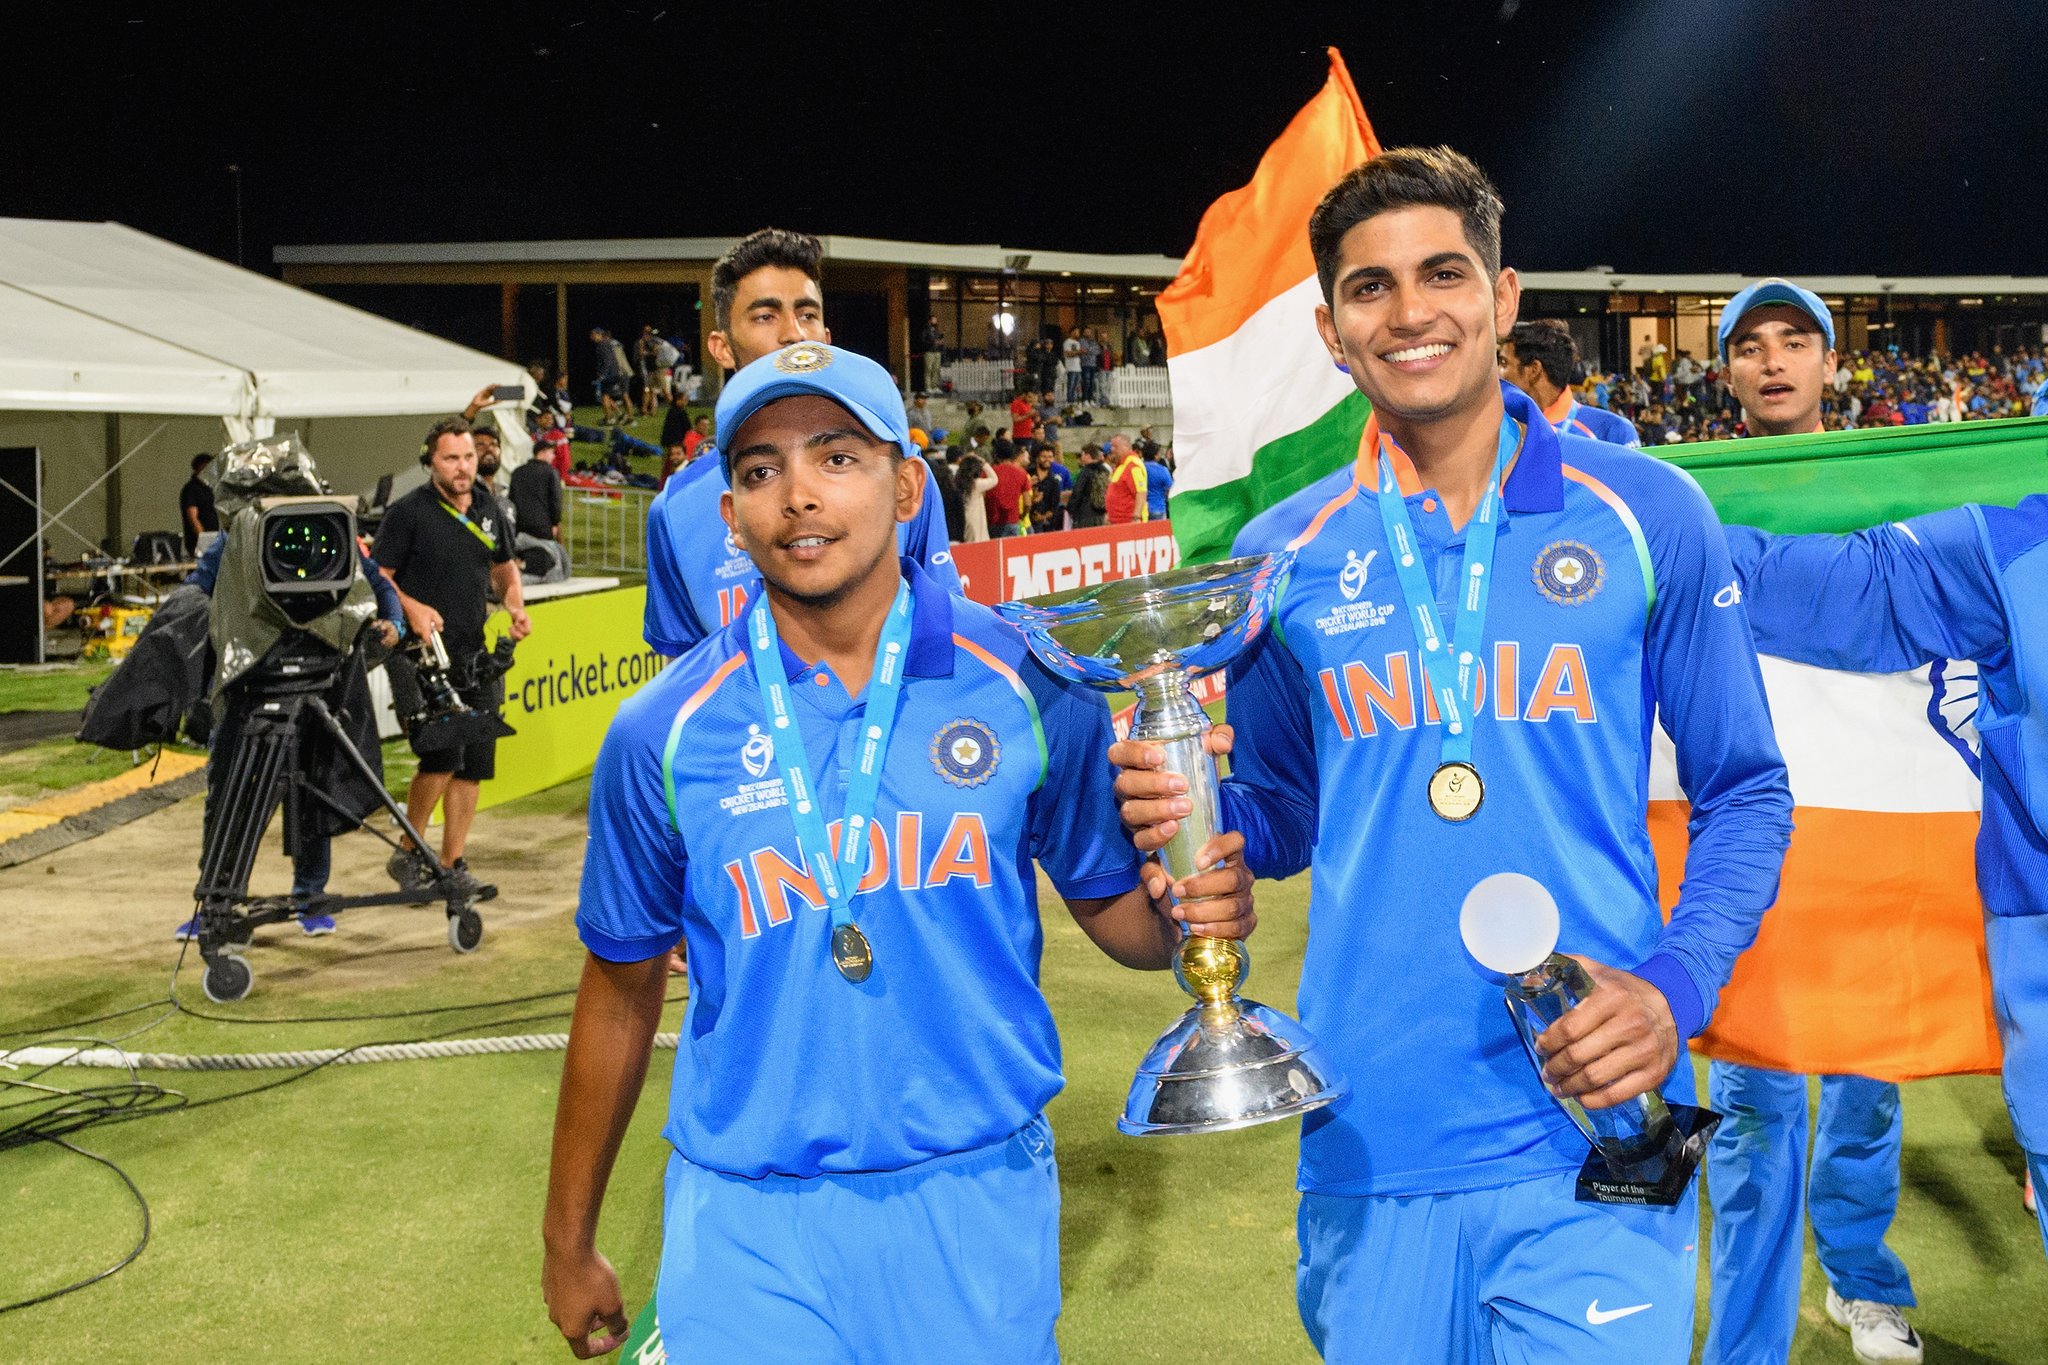 Cricbuzz Onthisday In 18 India Won The Icc Under 19 World Cup For A Record Fourth Time With An Eight Wicket Win Over Australia At Mount Maunganui T Co Ijb4jyjpxy T Co Imvb5lhsnw